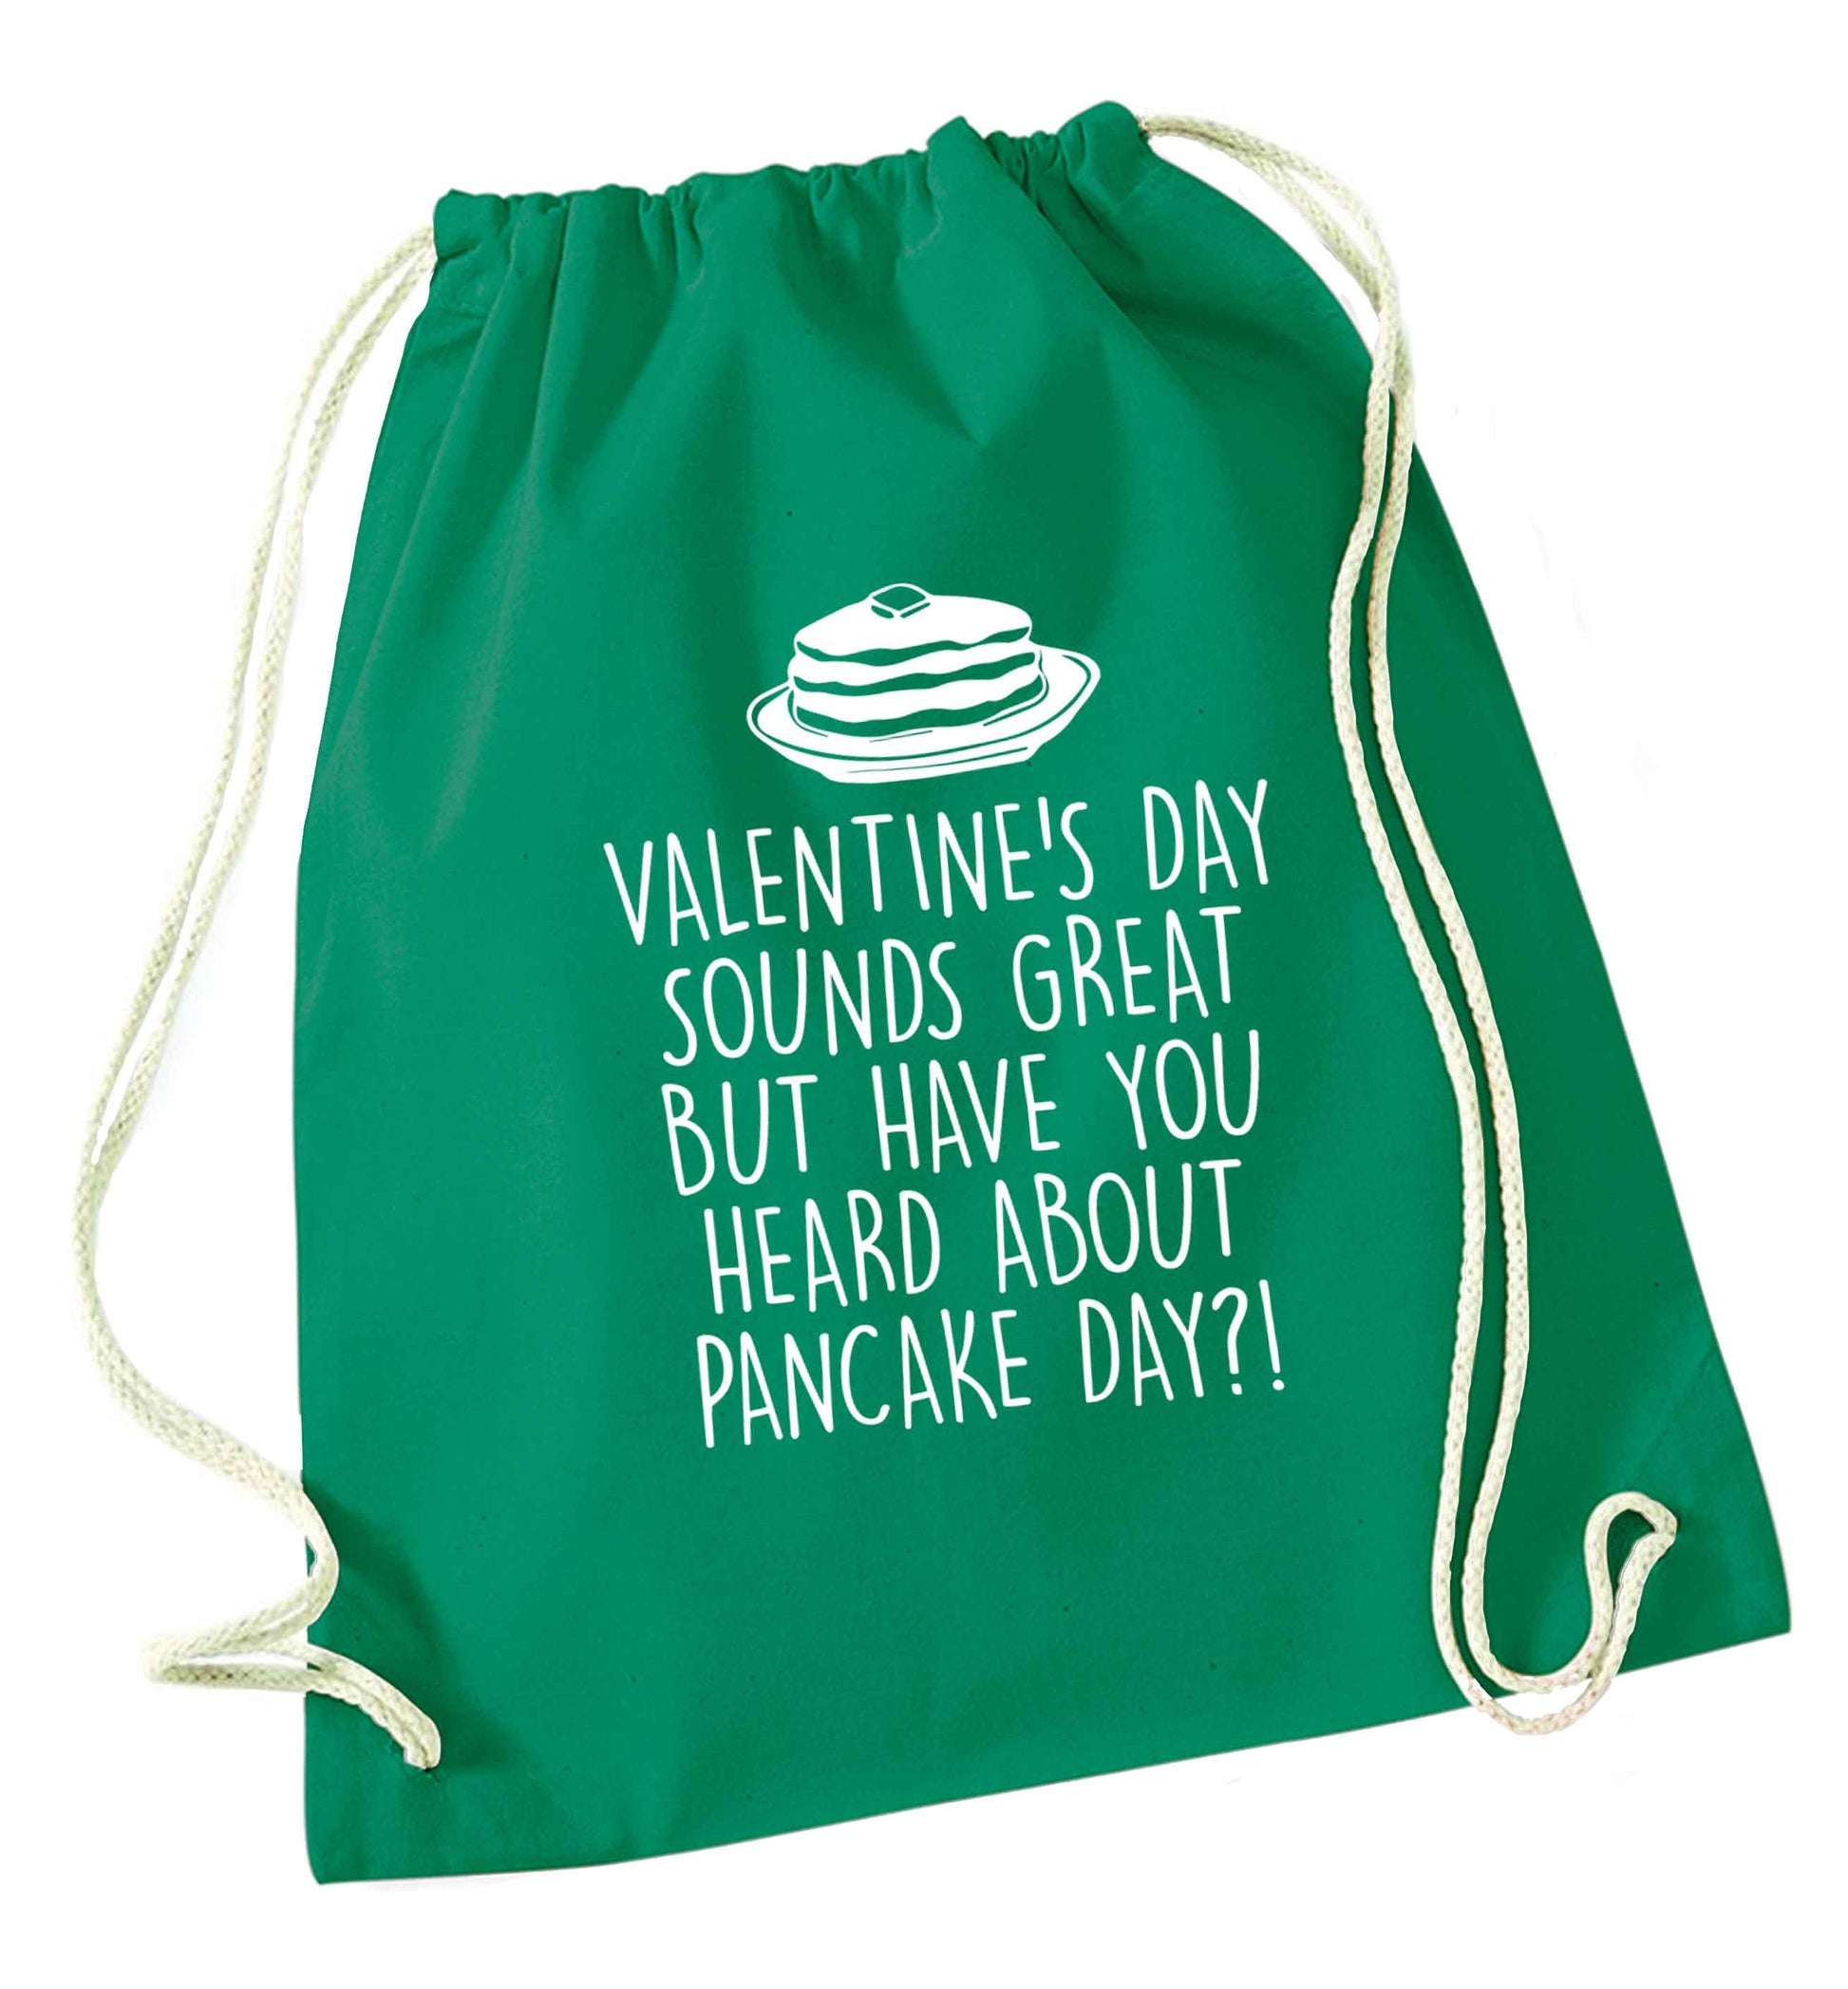 Valentine's day sounds great but have you heard about pancake day?! green drawstring bag